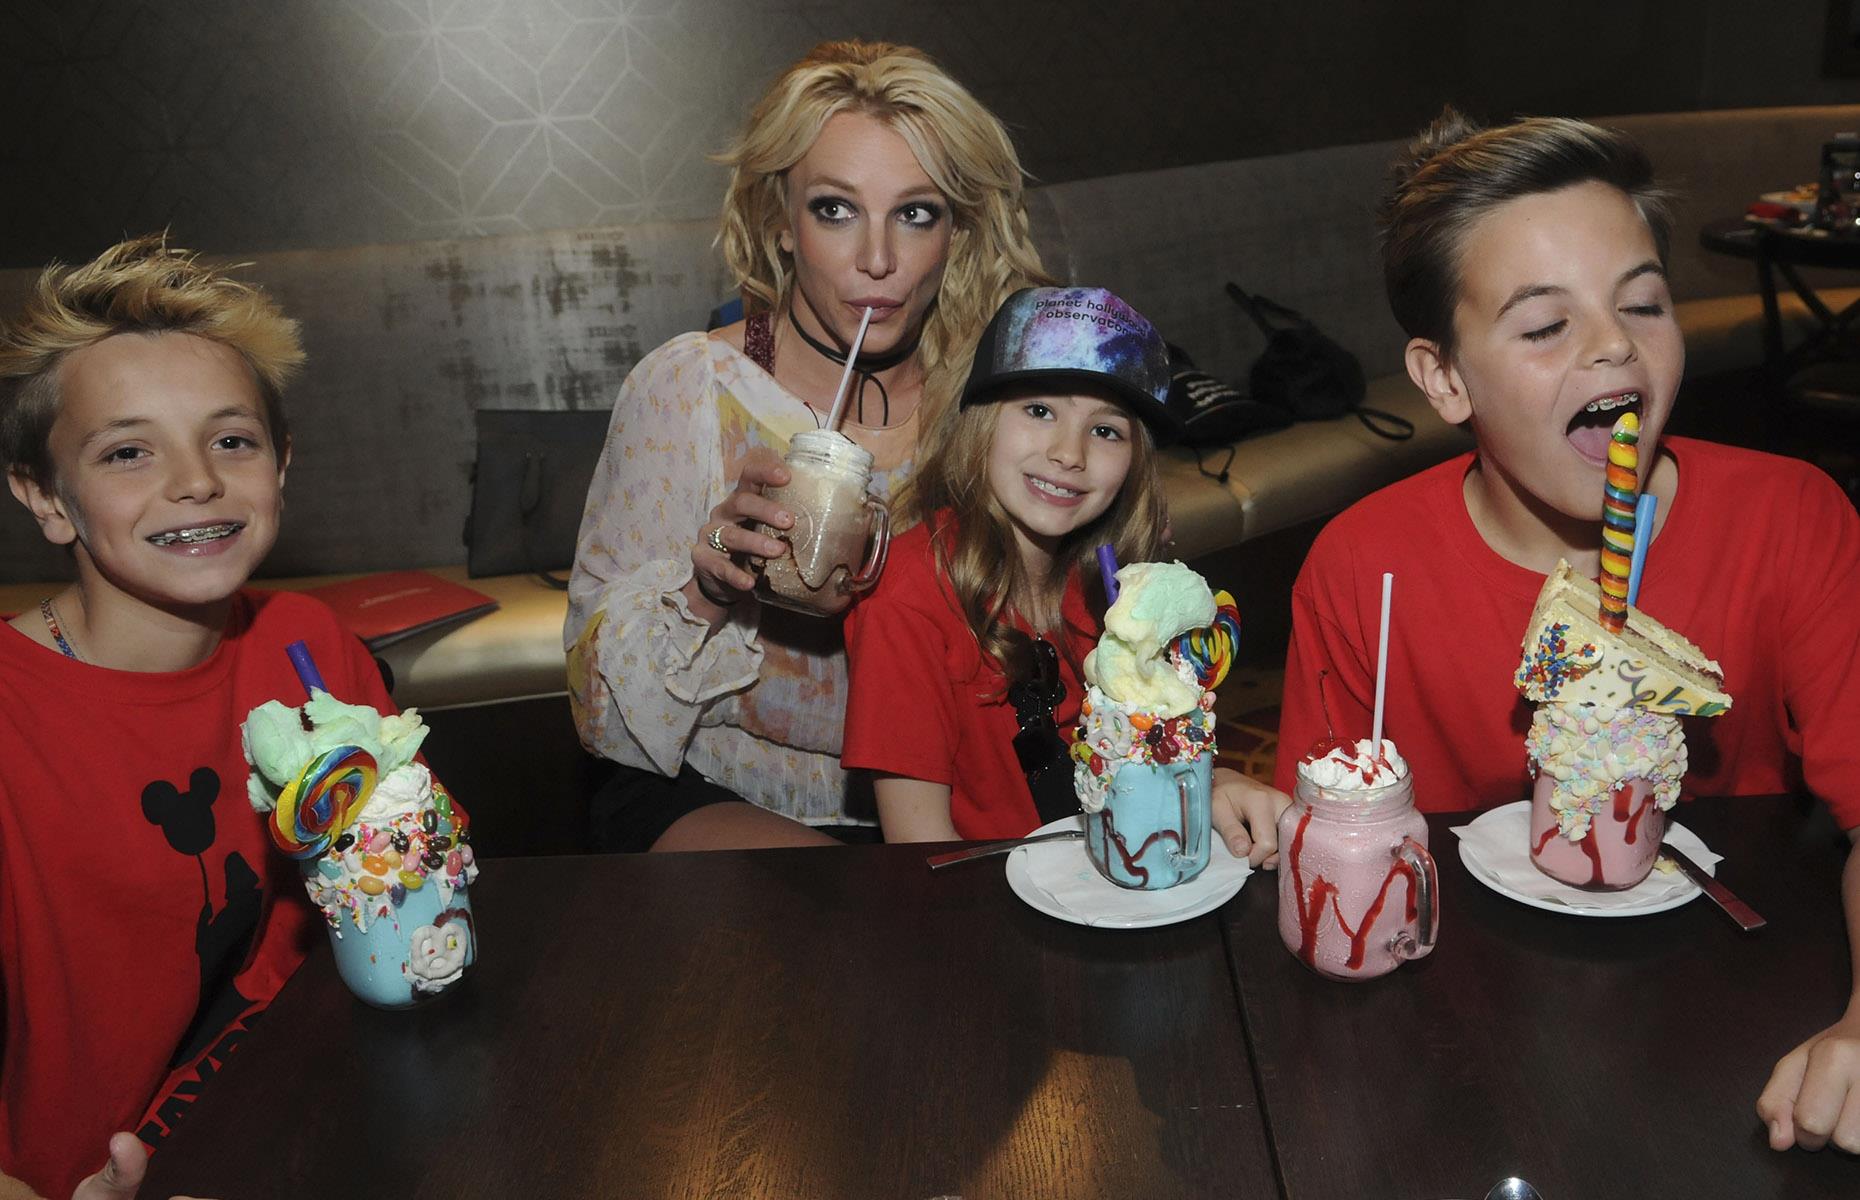 Britney is no longer paying child support for her eldest son